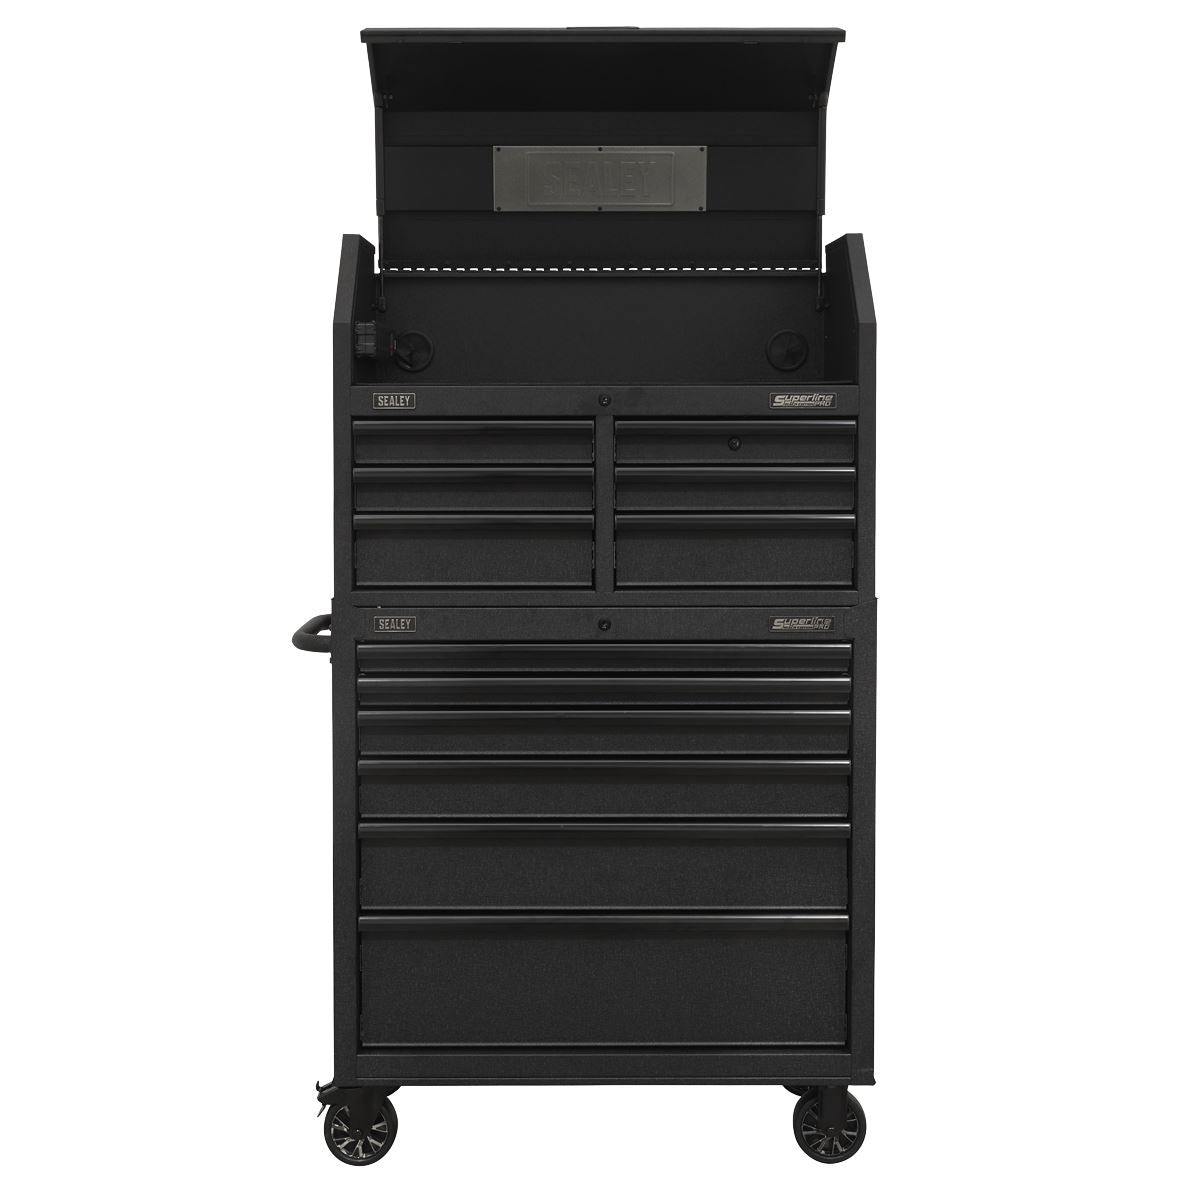 Sealey Superline Pro 12 Drawer Tool Chest Combination with Power Bar